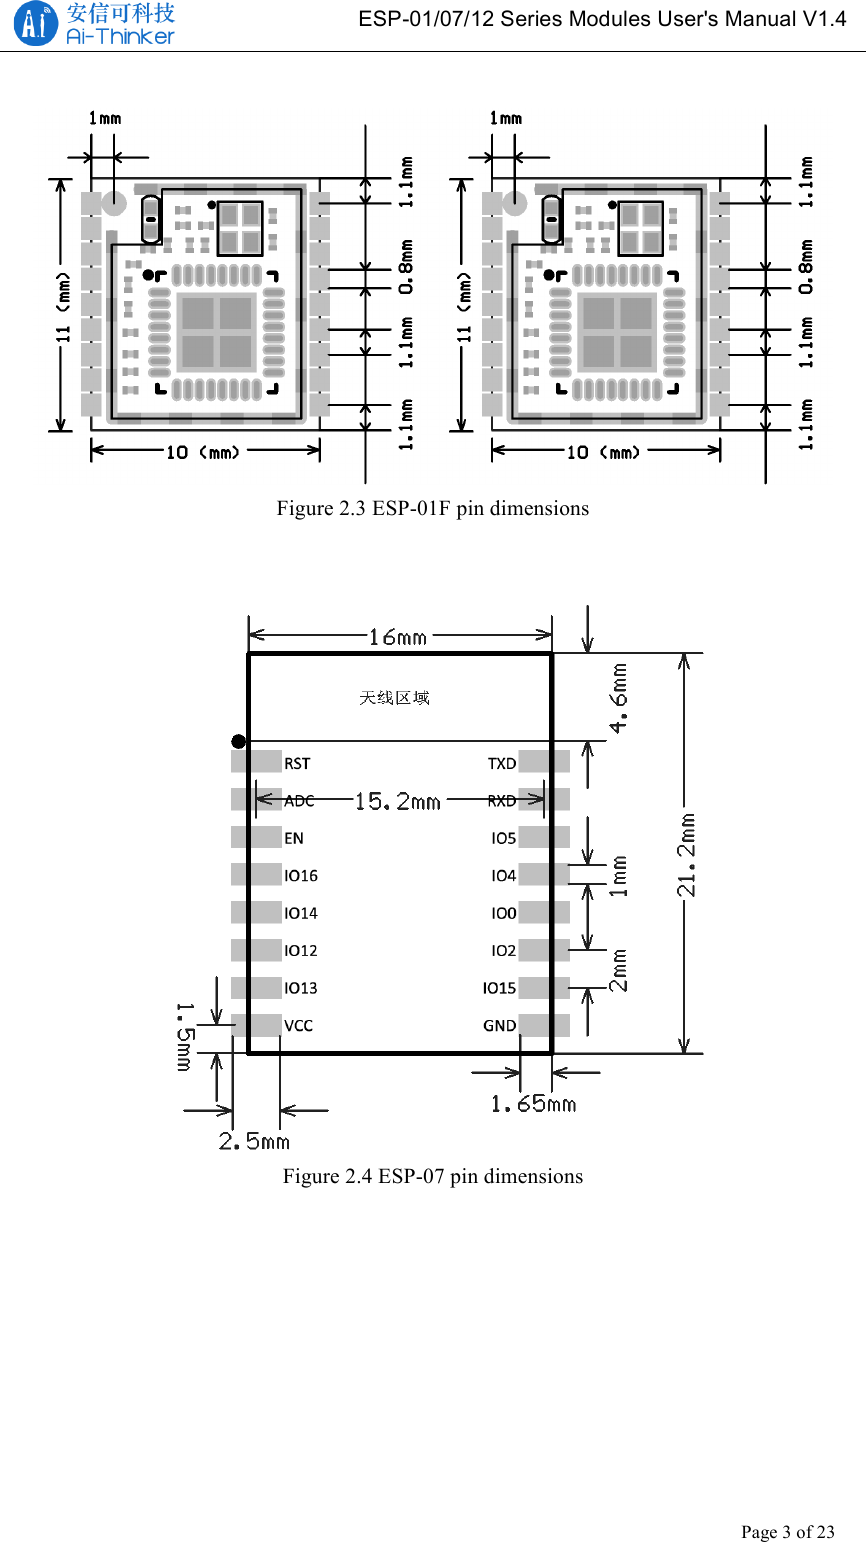   ESP-01/07/12 Series Modules User&apos;s Manual V1.4 Copyright © 2017 Shenzhen Ai-Thinker Technology Co., Ltd All Rights Reserved Page 3 of 23     Figure 2.3 ESP-01F pin dimensions   Figure 2.4 ESP-07 pin dimensions   